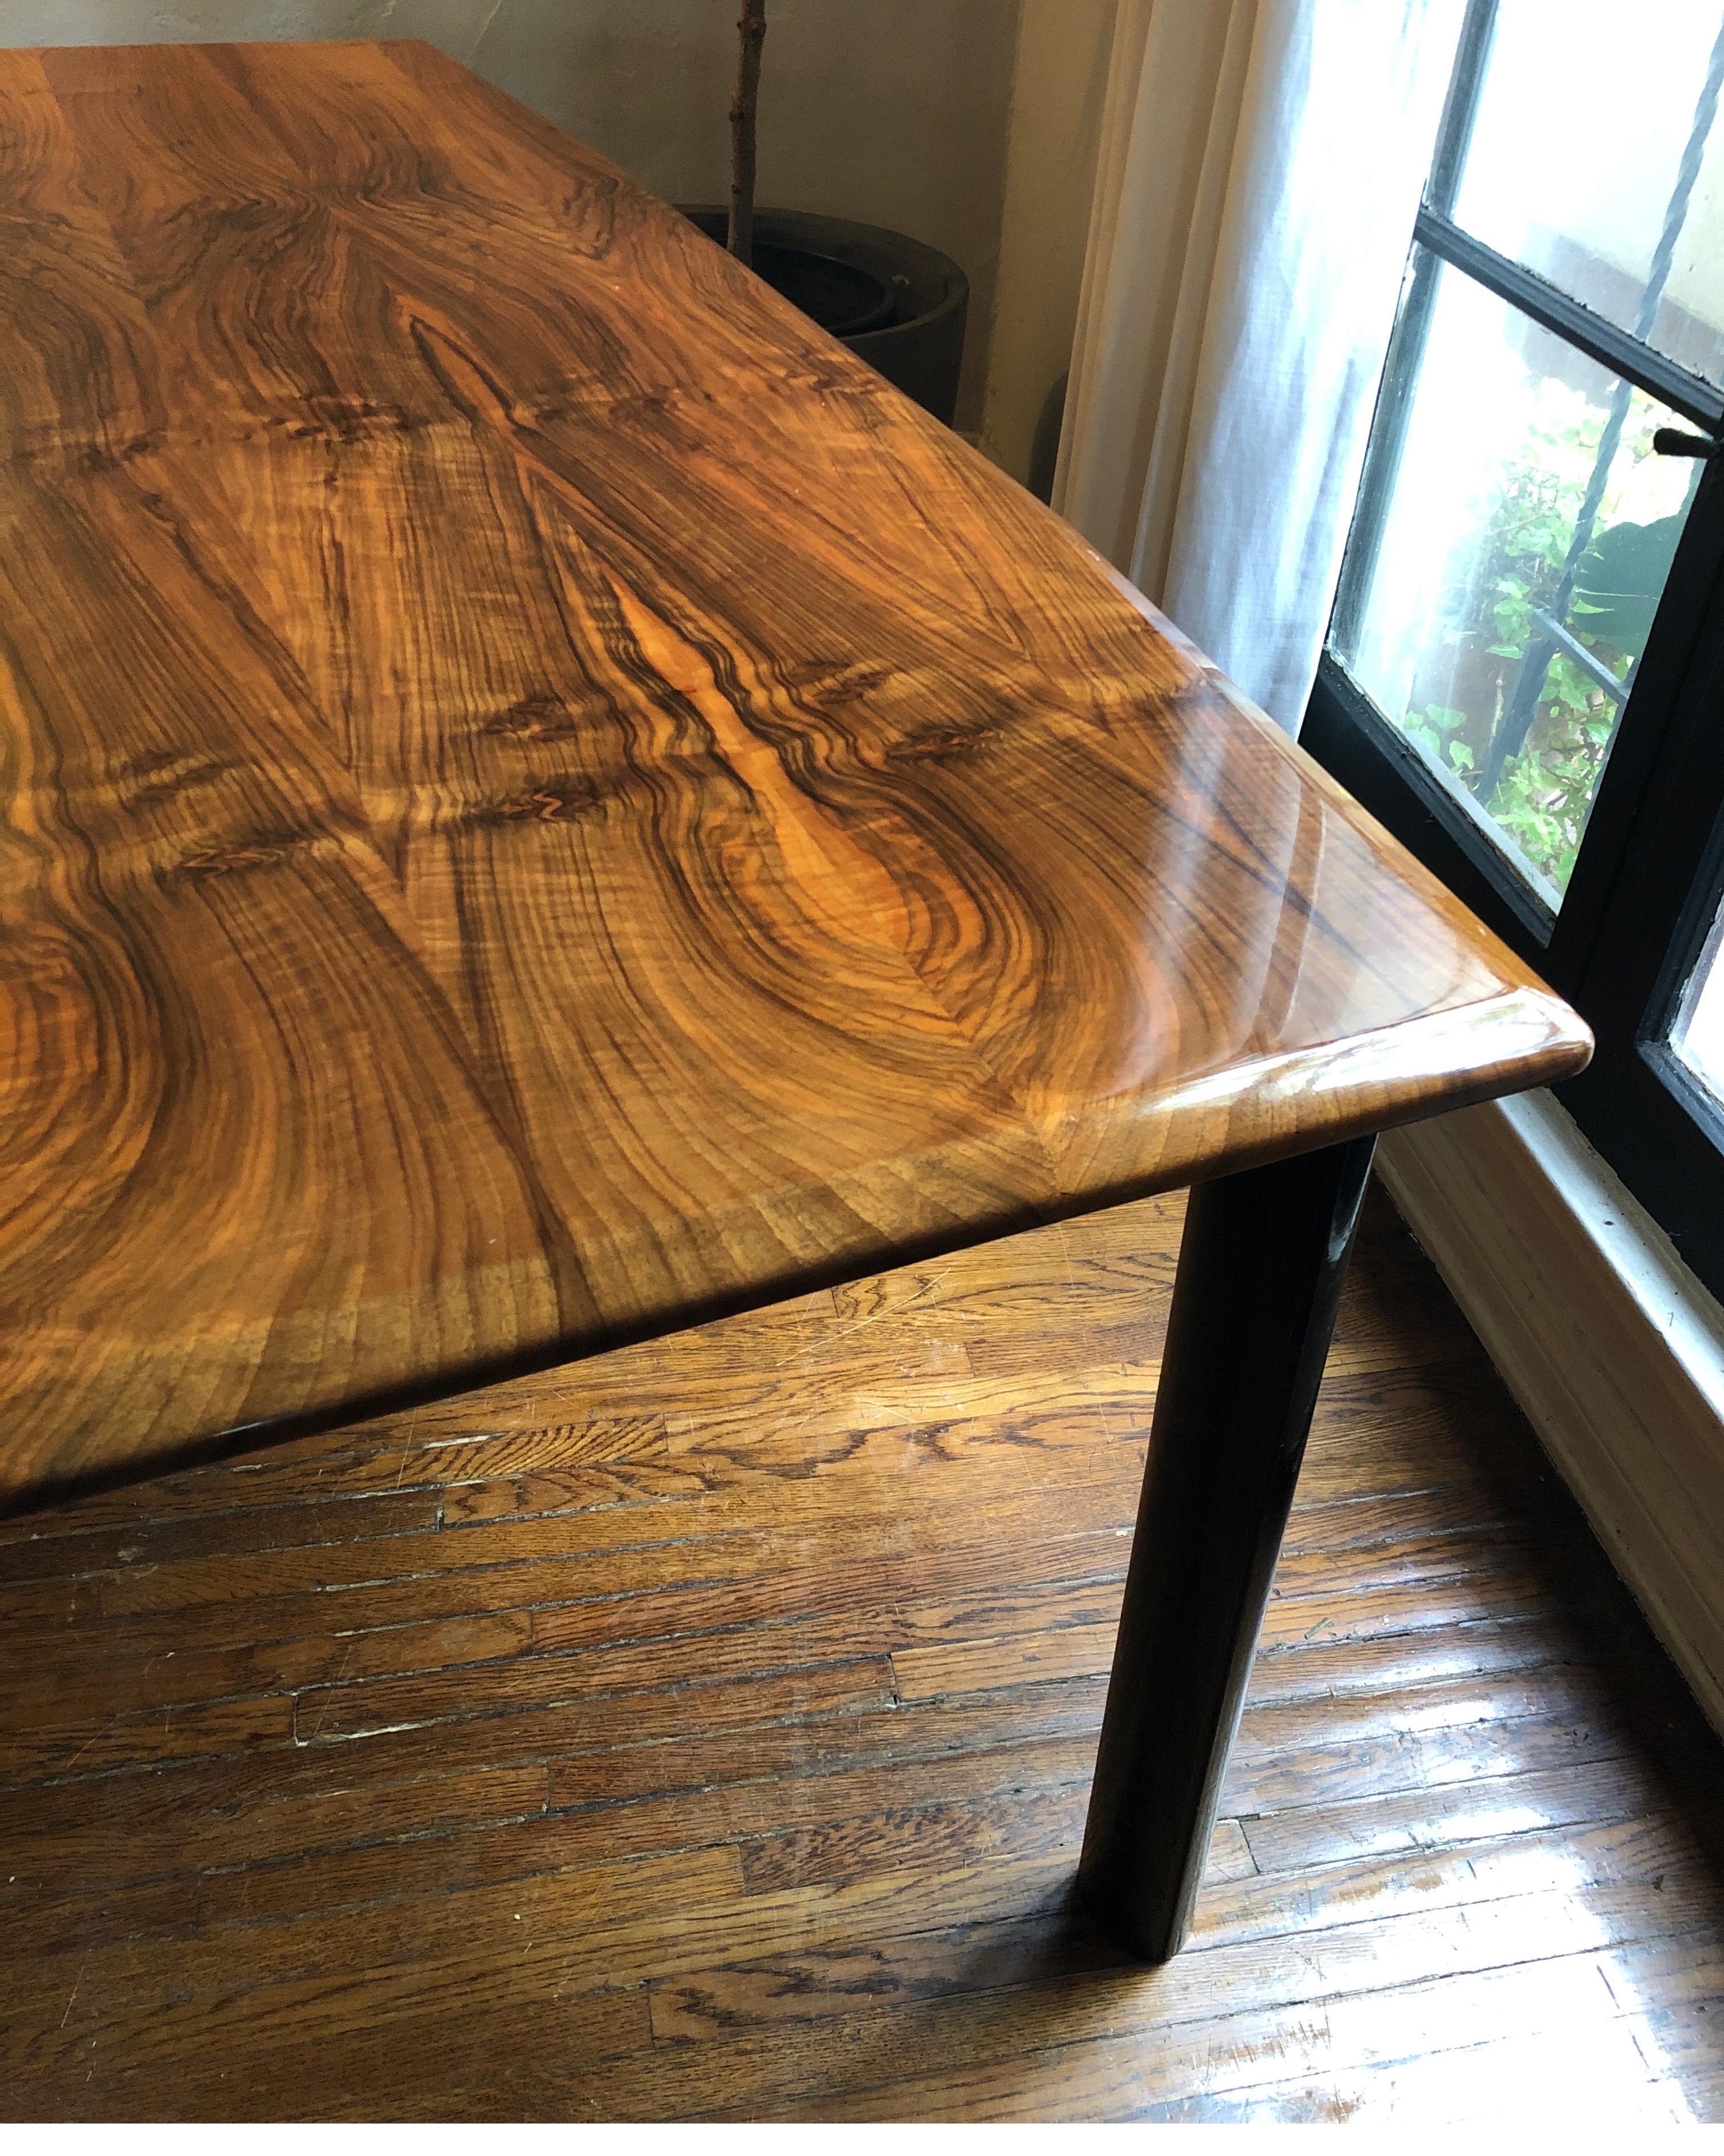 Gorgeous rectangular Macassar ebony wood sits atop a black lacquer base. Midcentury/Art Deco.
Beautiful solid woodgrain along the top. Edges have an interesting shape/detail. See pics.
Top does have some superficial scratches. Possibly polished